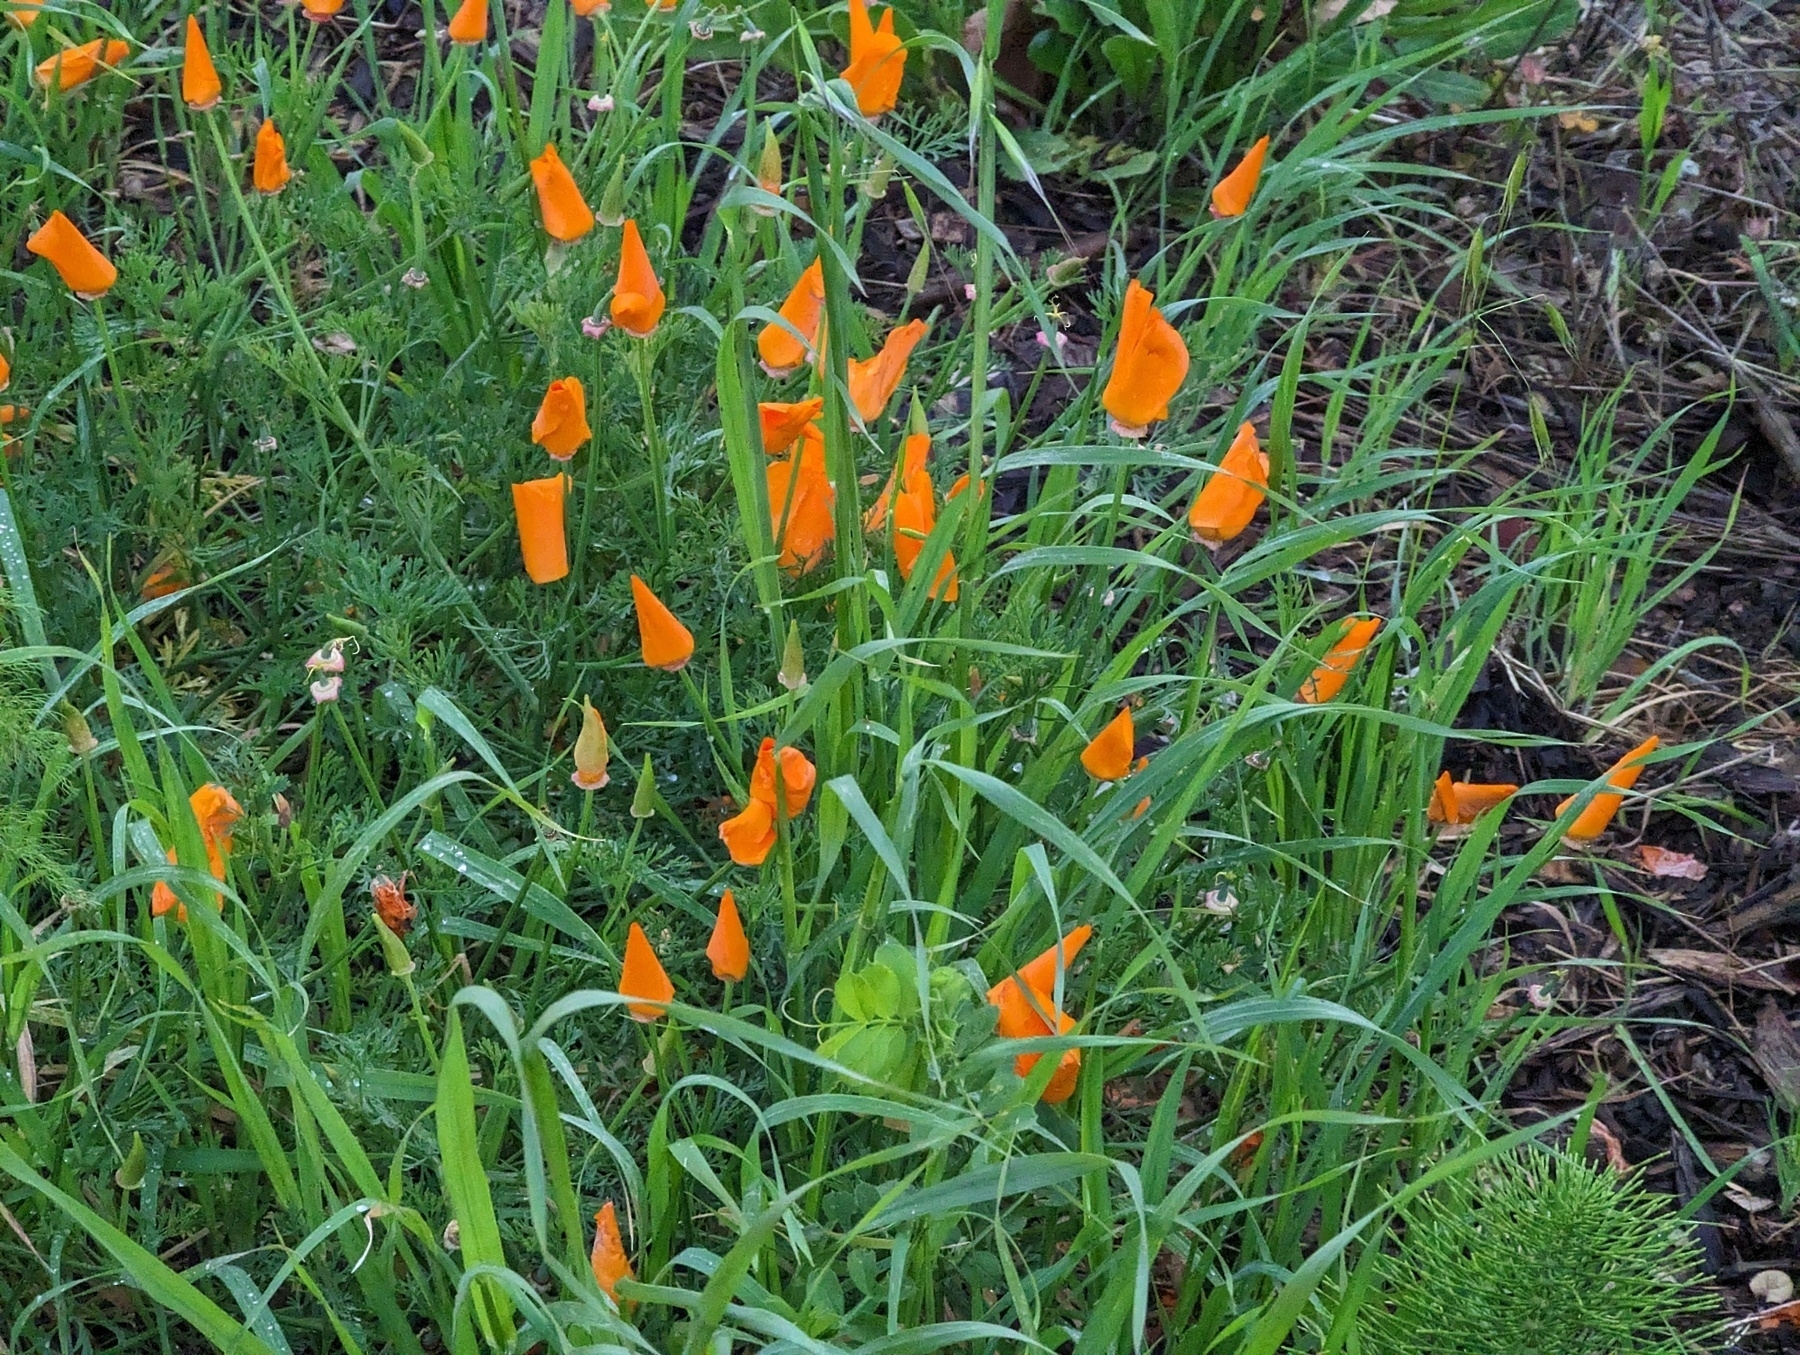 Bright orange petaled California poppies spring up out of brilliant green grasses like tiny dancing flames Tuesday, March 28, 2023 alongside the Wildcat Creek greenway in San Pablo, California.